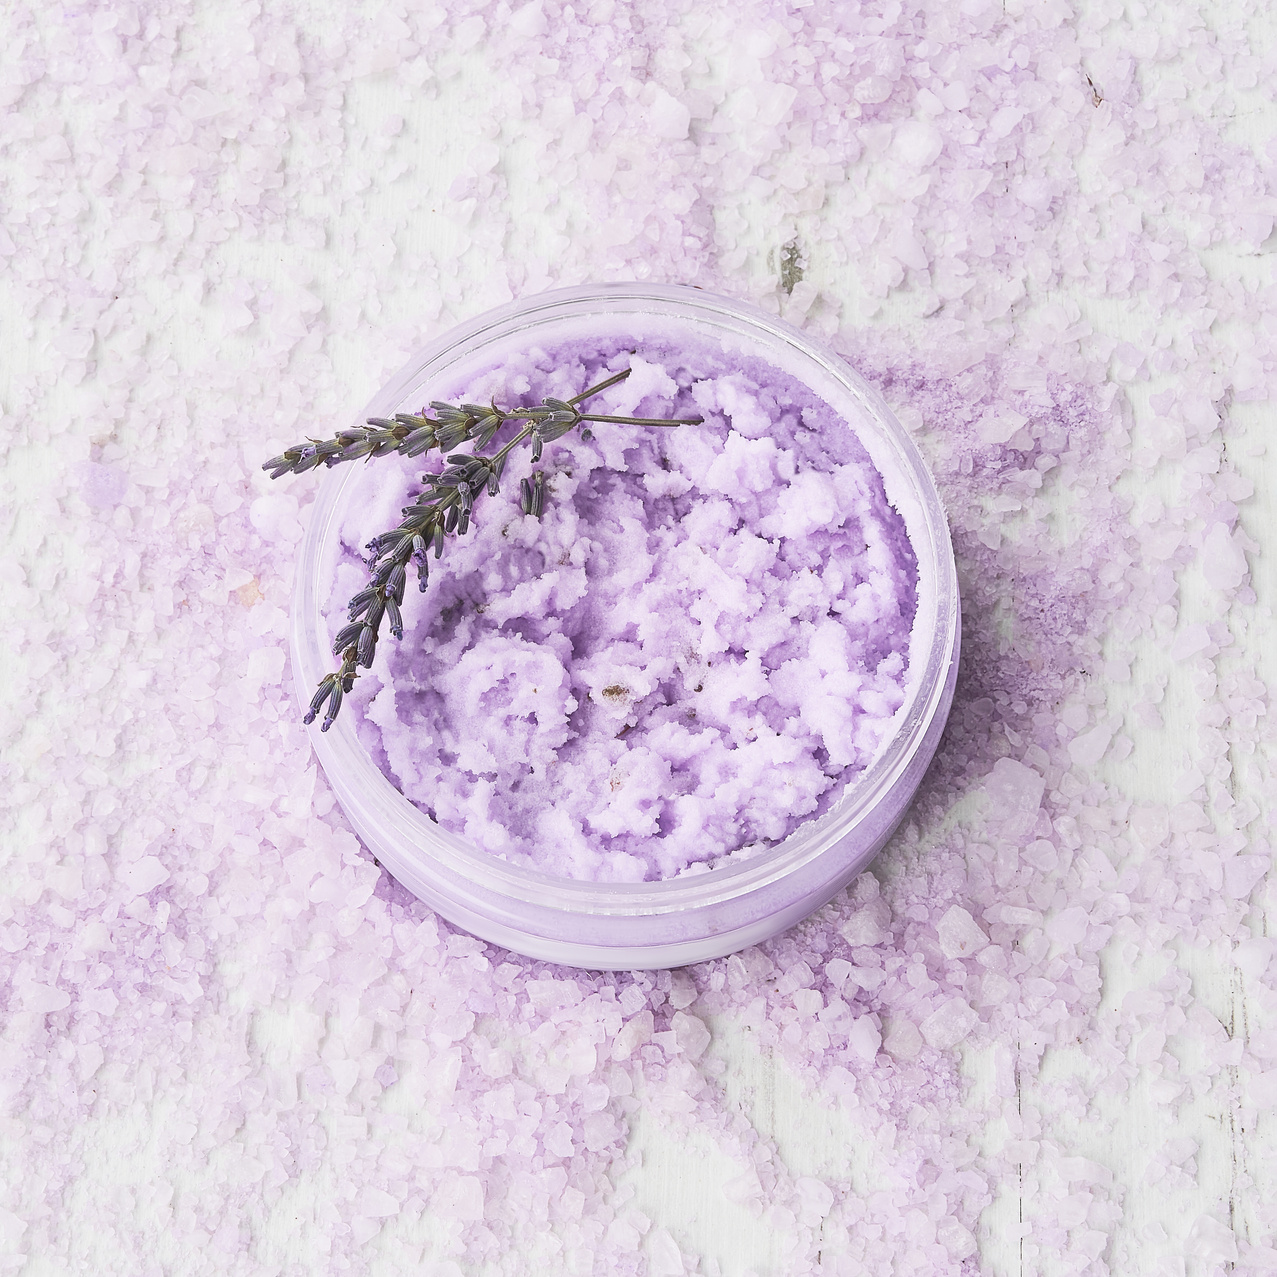 Homemade lavender body scrub in a bowl on lavender bath salt background. Top view, copy space. SPA concept